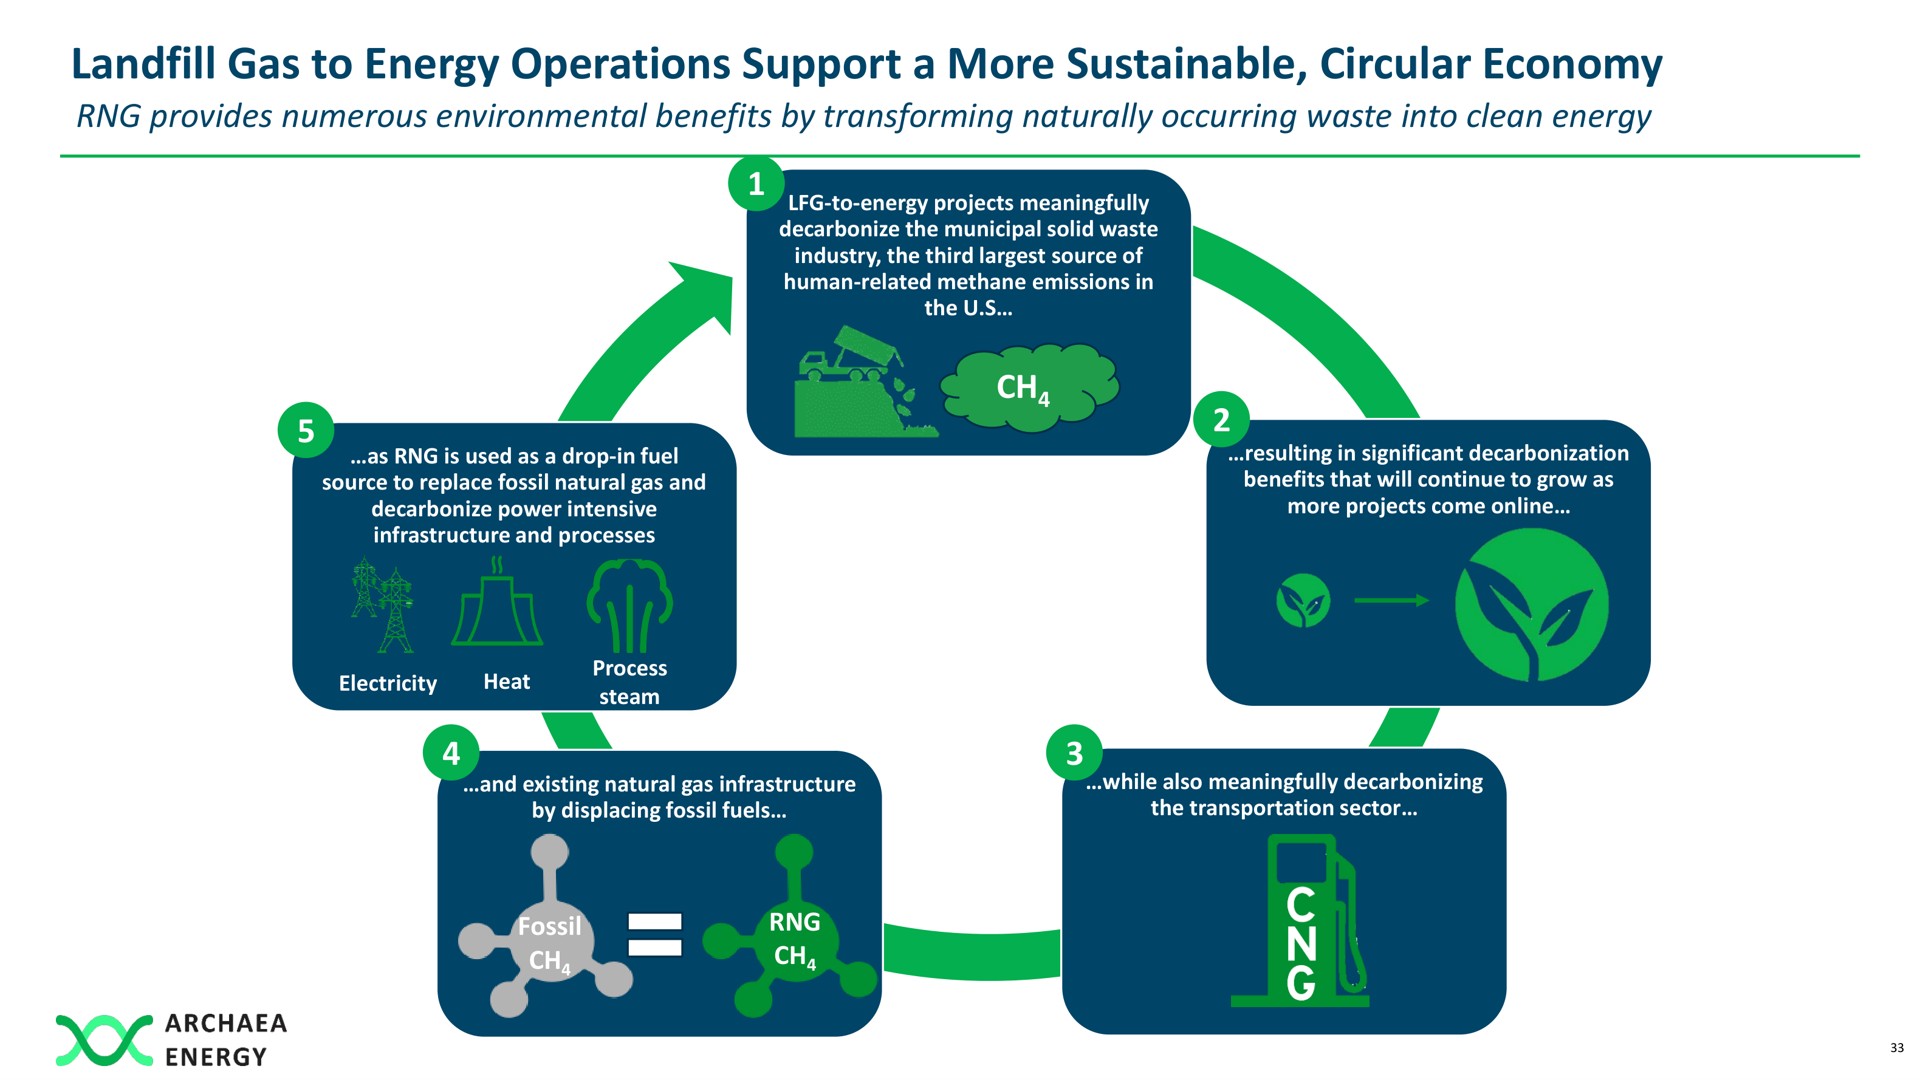 gas to energy operations support a more sustainable circular economy | Archaea Energy